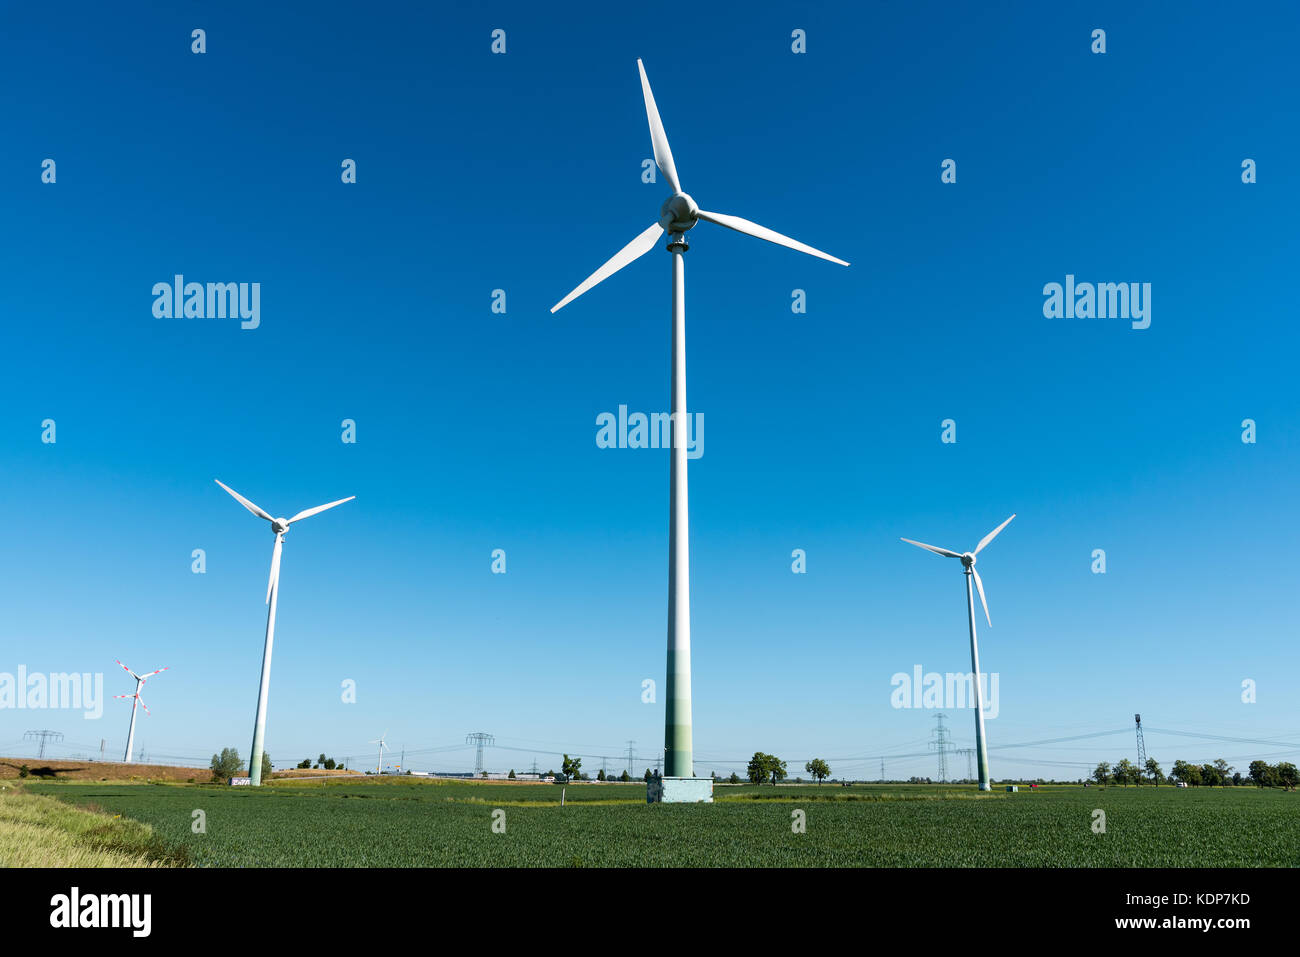 Wind power plant seen in Germany Stock Photo